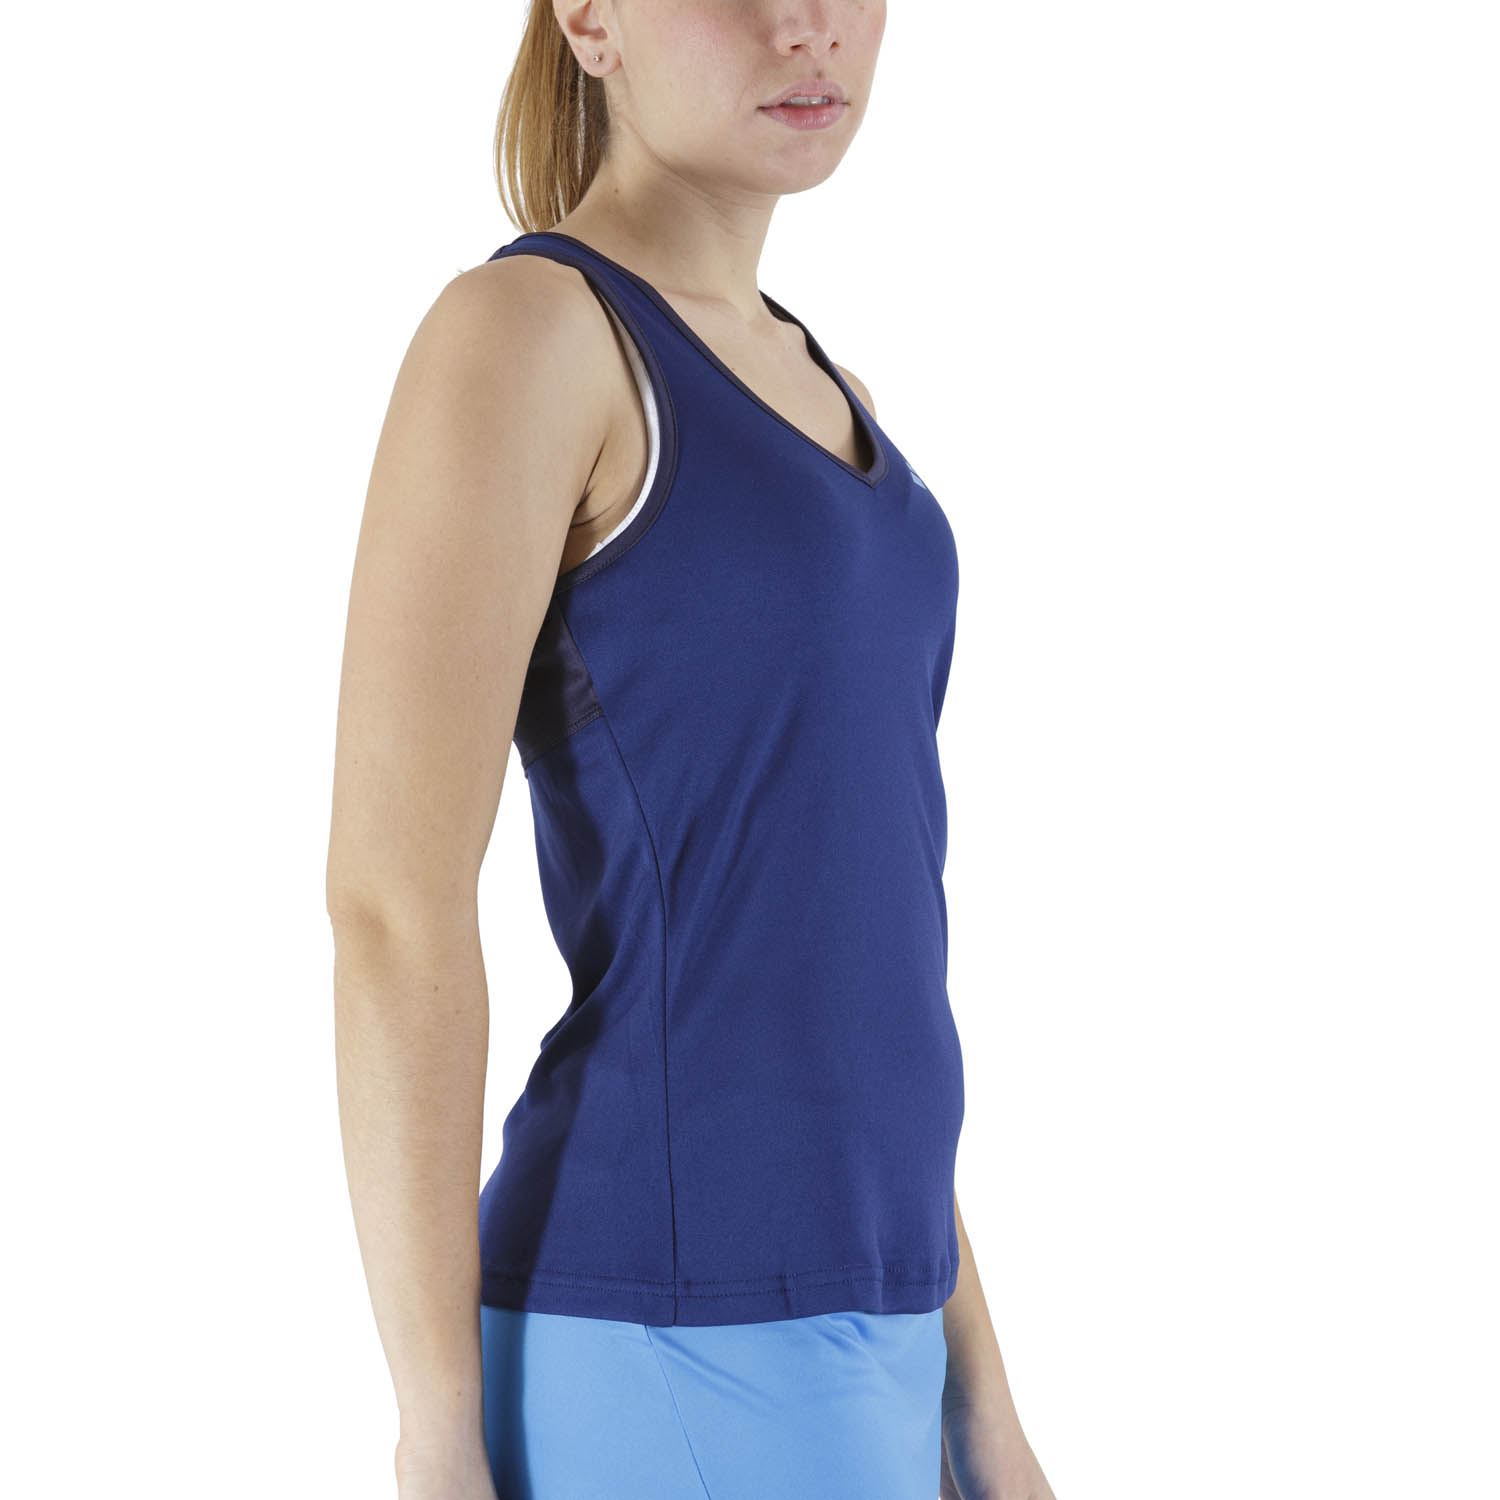 Babolat Match Performance Tennis Tank Turquoise Blue Ladies Functional Tank Top with Bra 